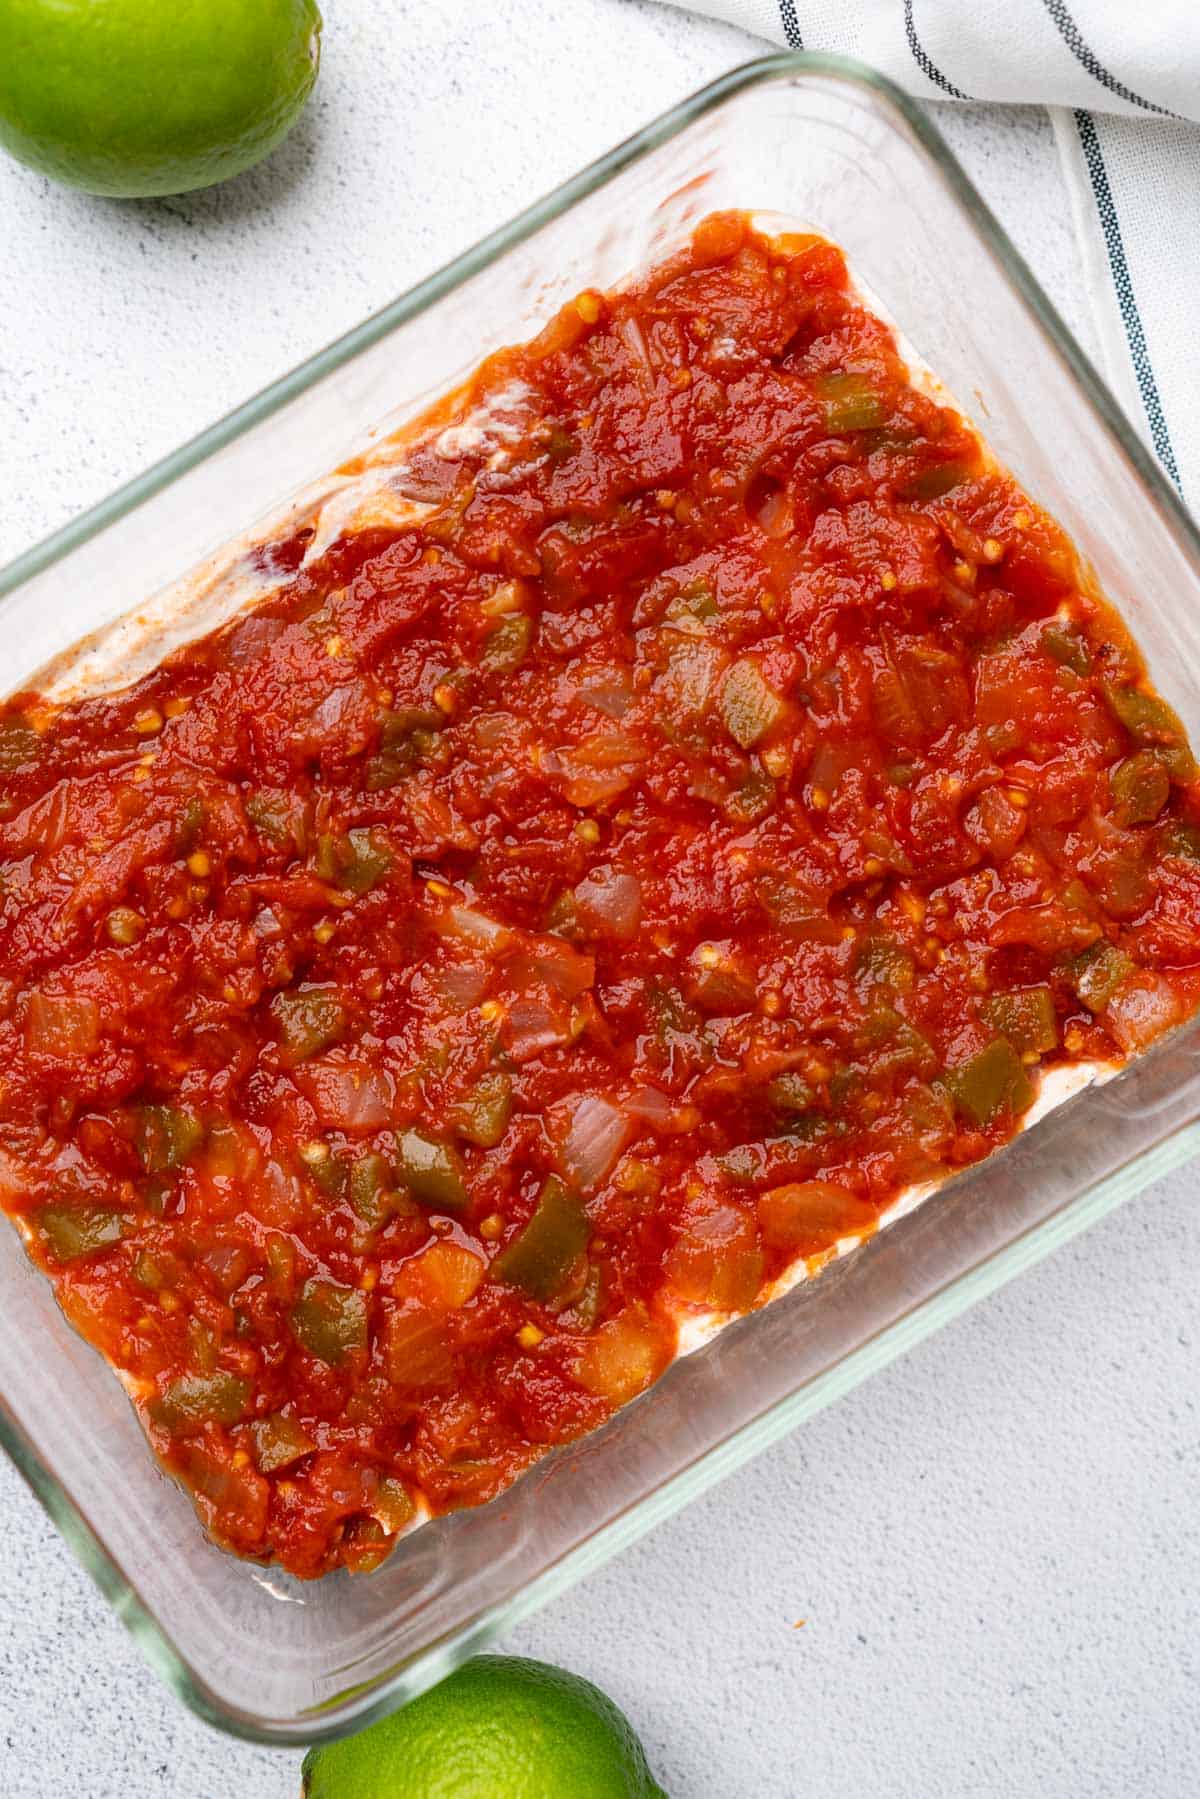 chunky salsa layered on top of seasoned sour cream in a glass casserole dish